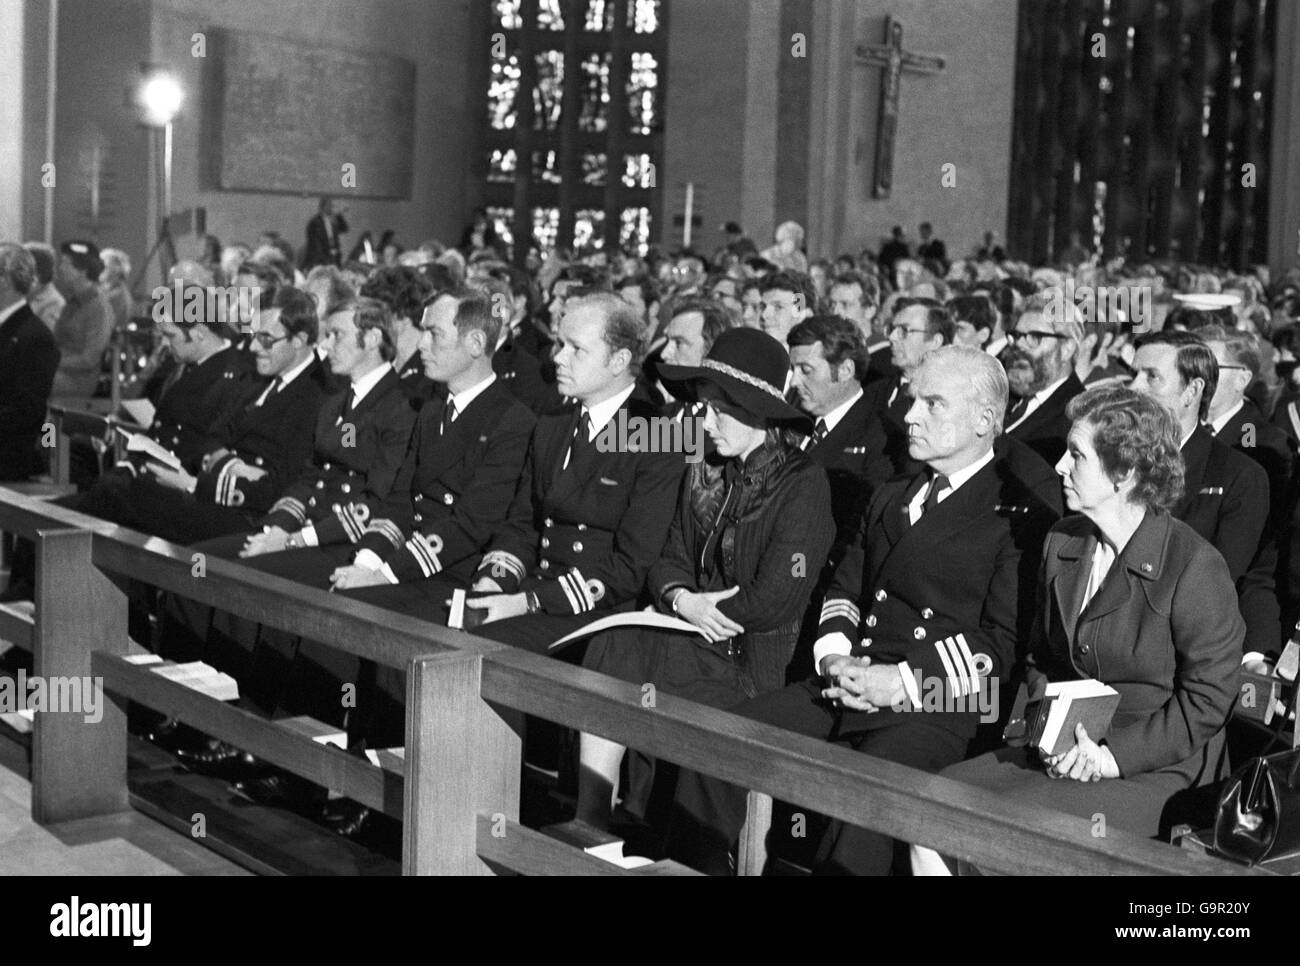 Royal Naval officers among the congregation at Coventry cathedral during a Memorial Service for the men who lost their lives in the Type 42 destroyer named after the city. Stock Photo